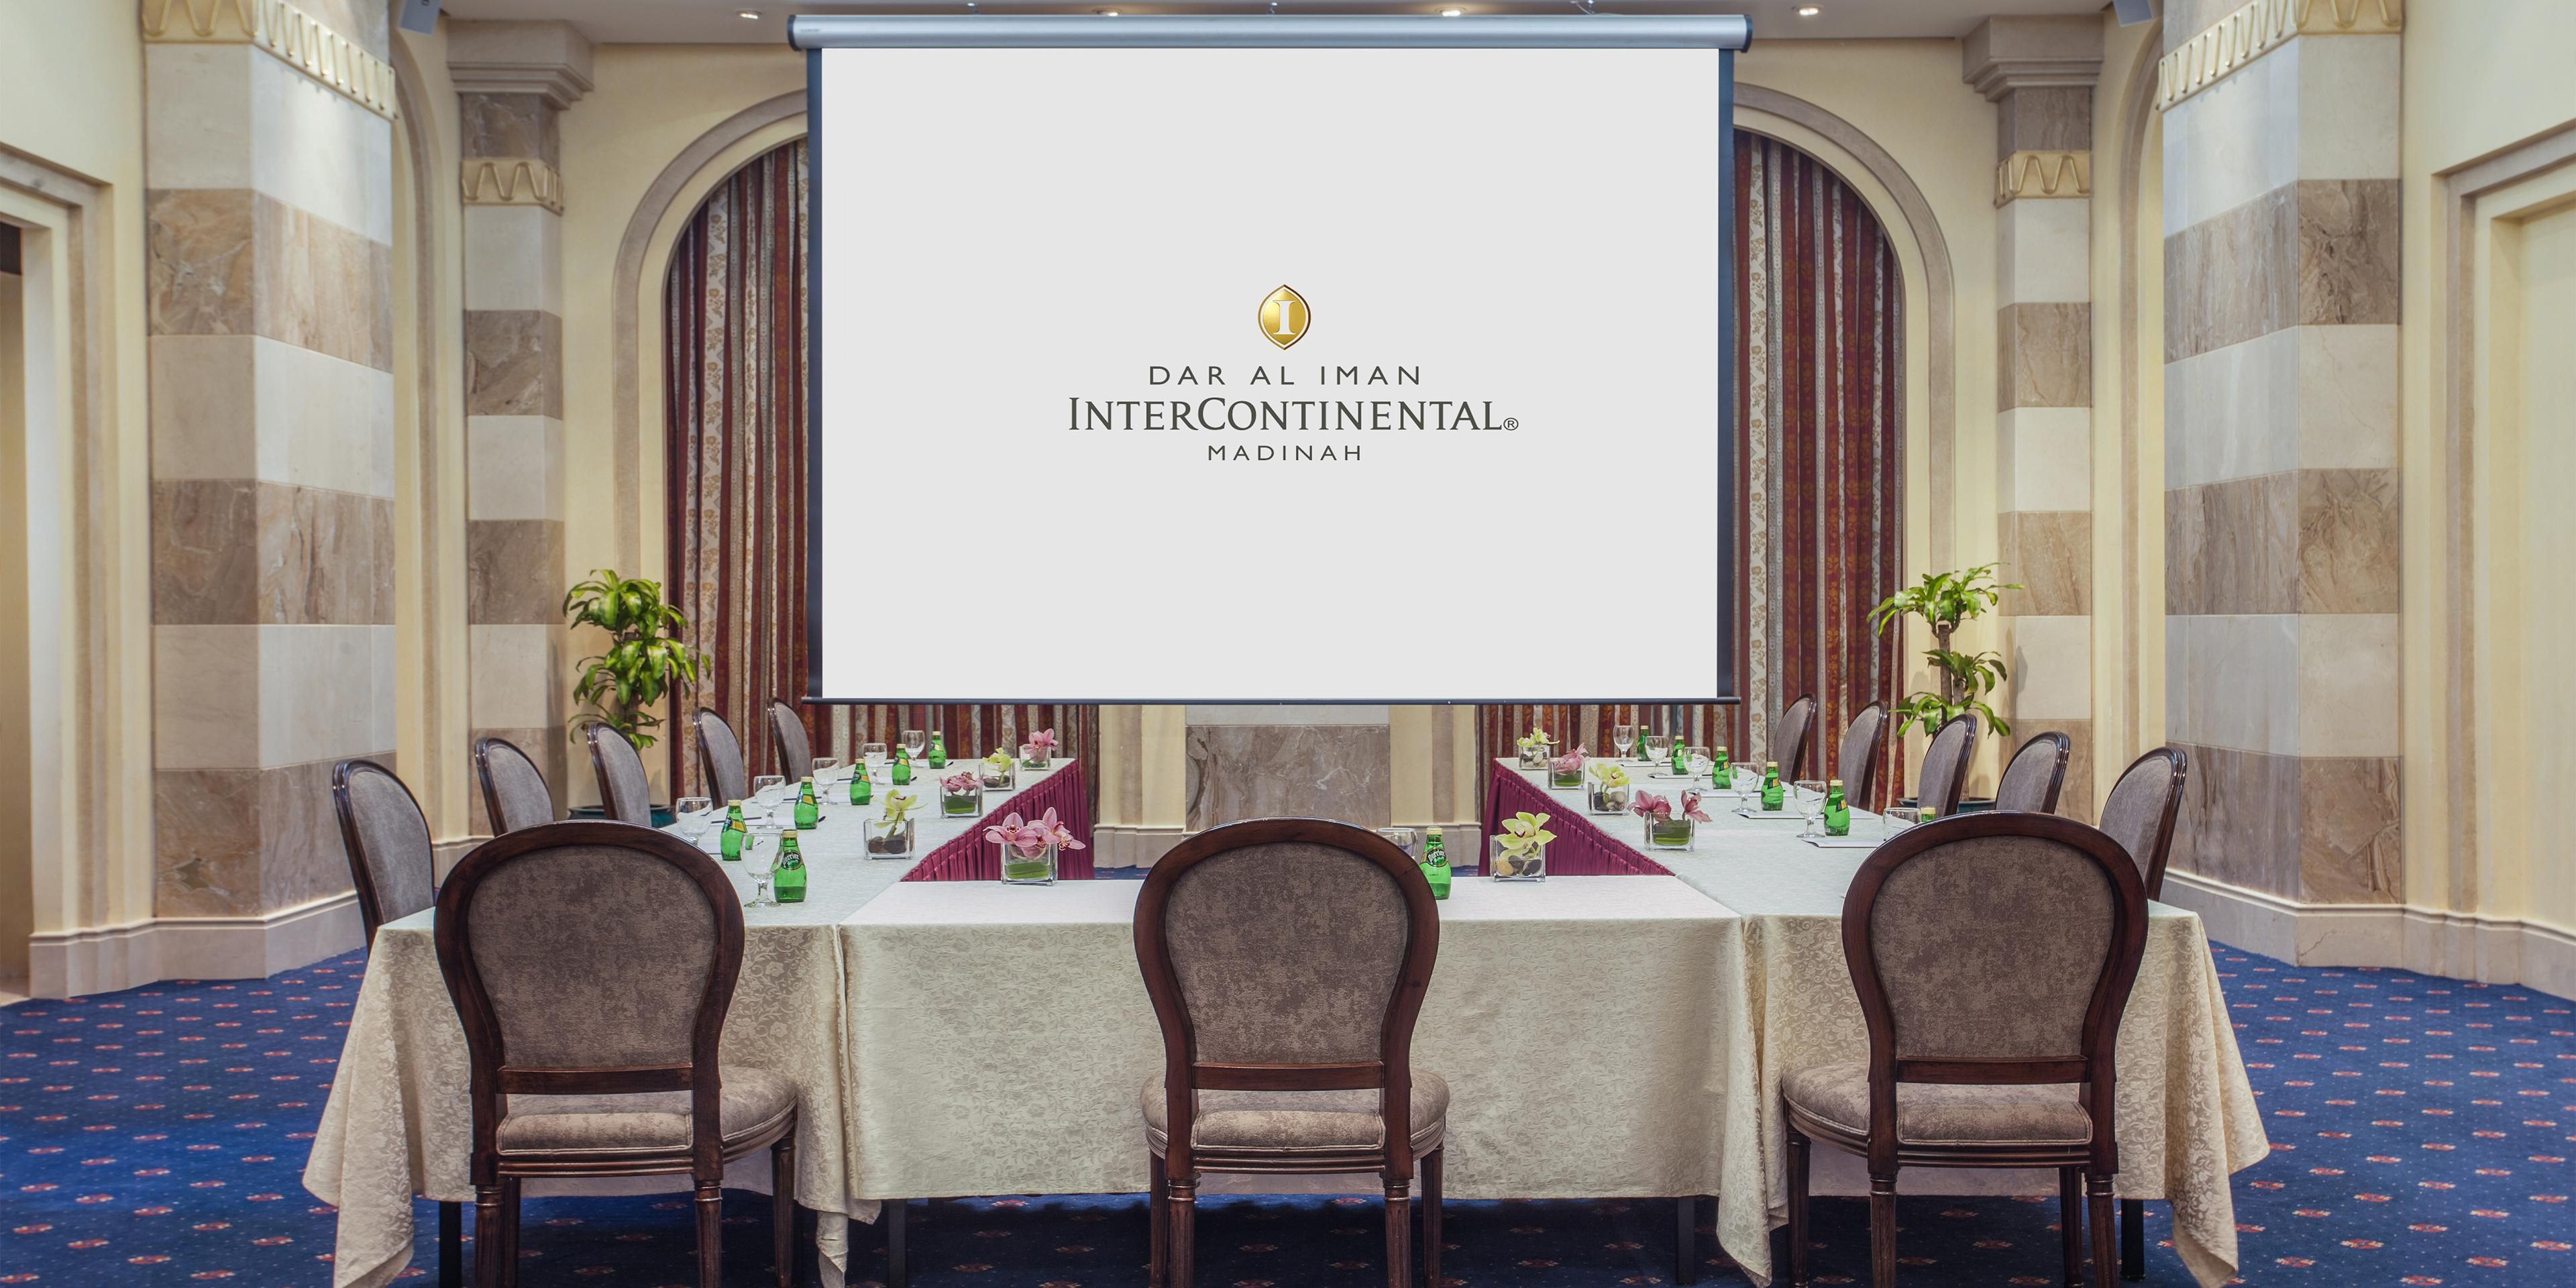 Al Huda Lounge is an ideal venue for conferences or banquets. With 276 square meters, it has flexible space and a variety of customized catering options that suit each requirement.